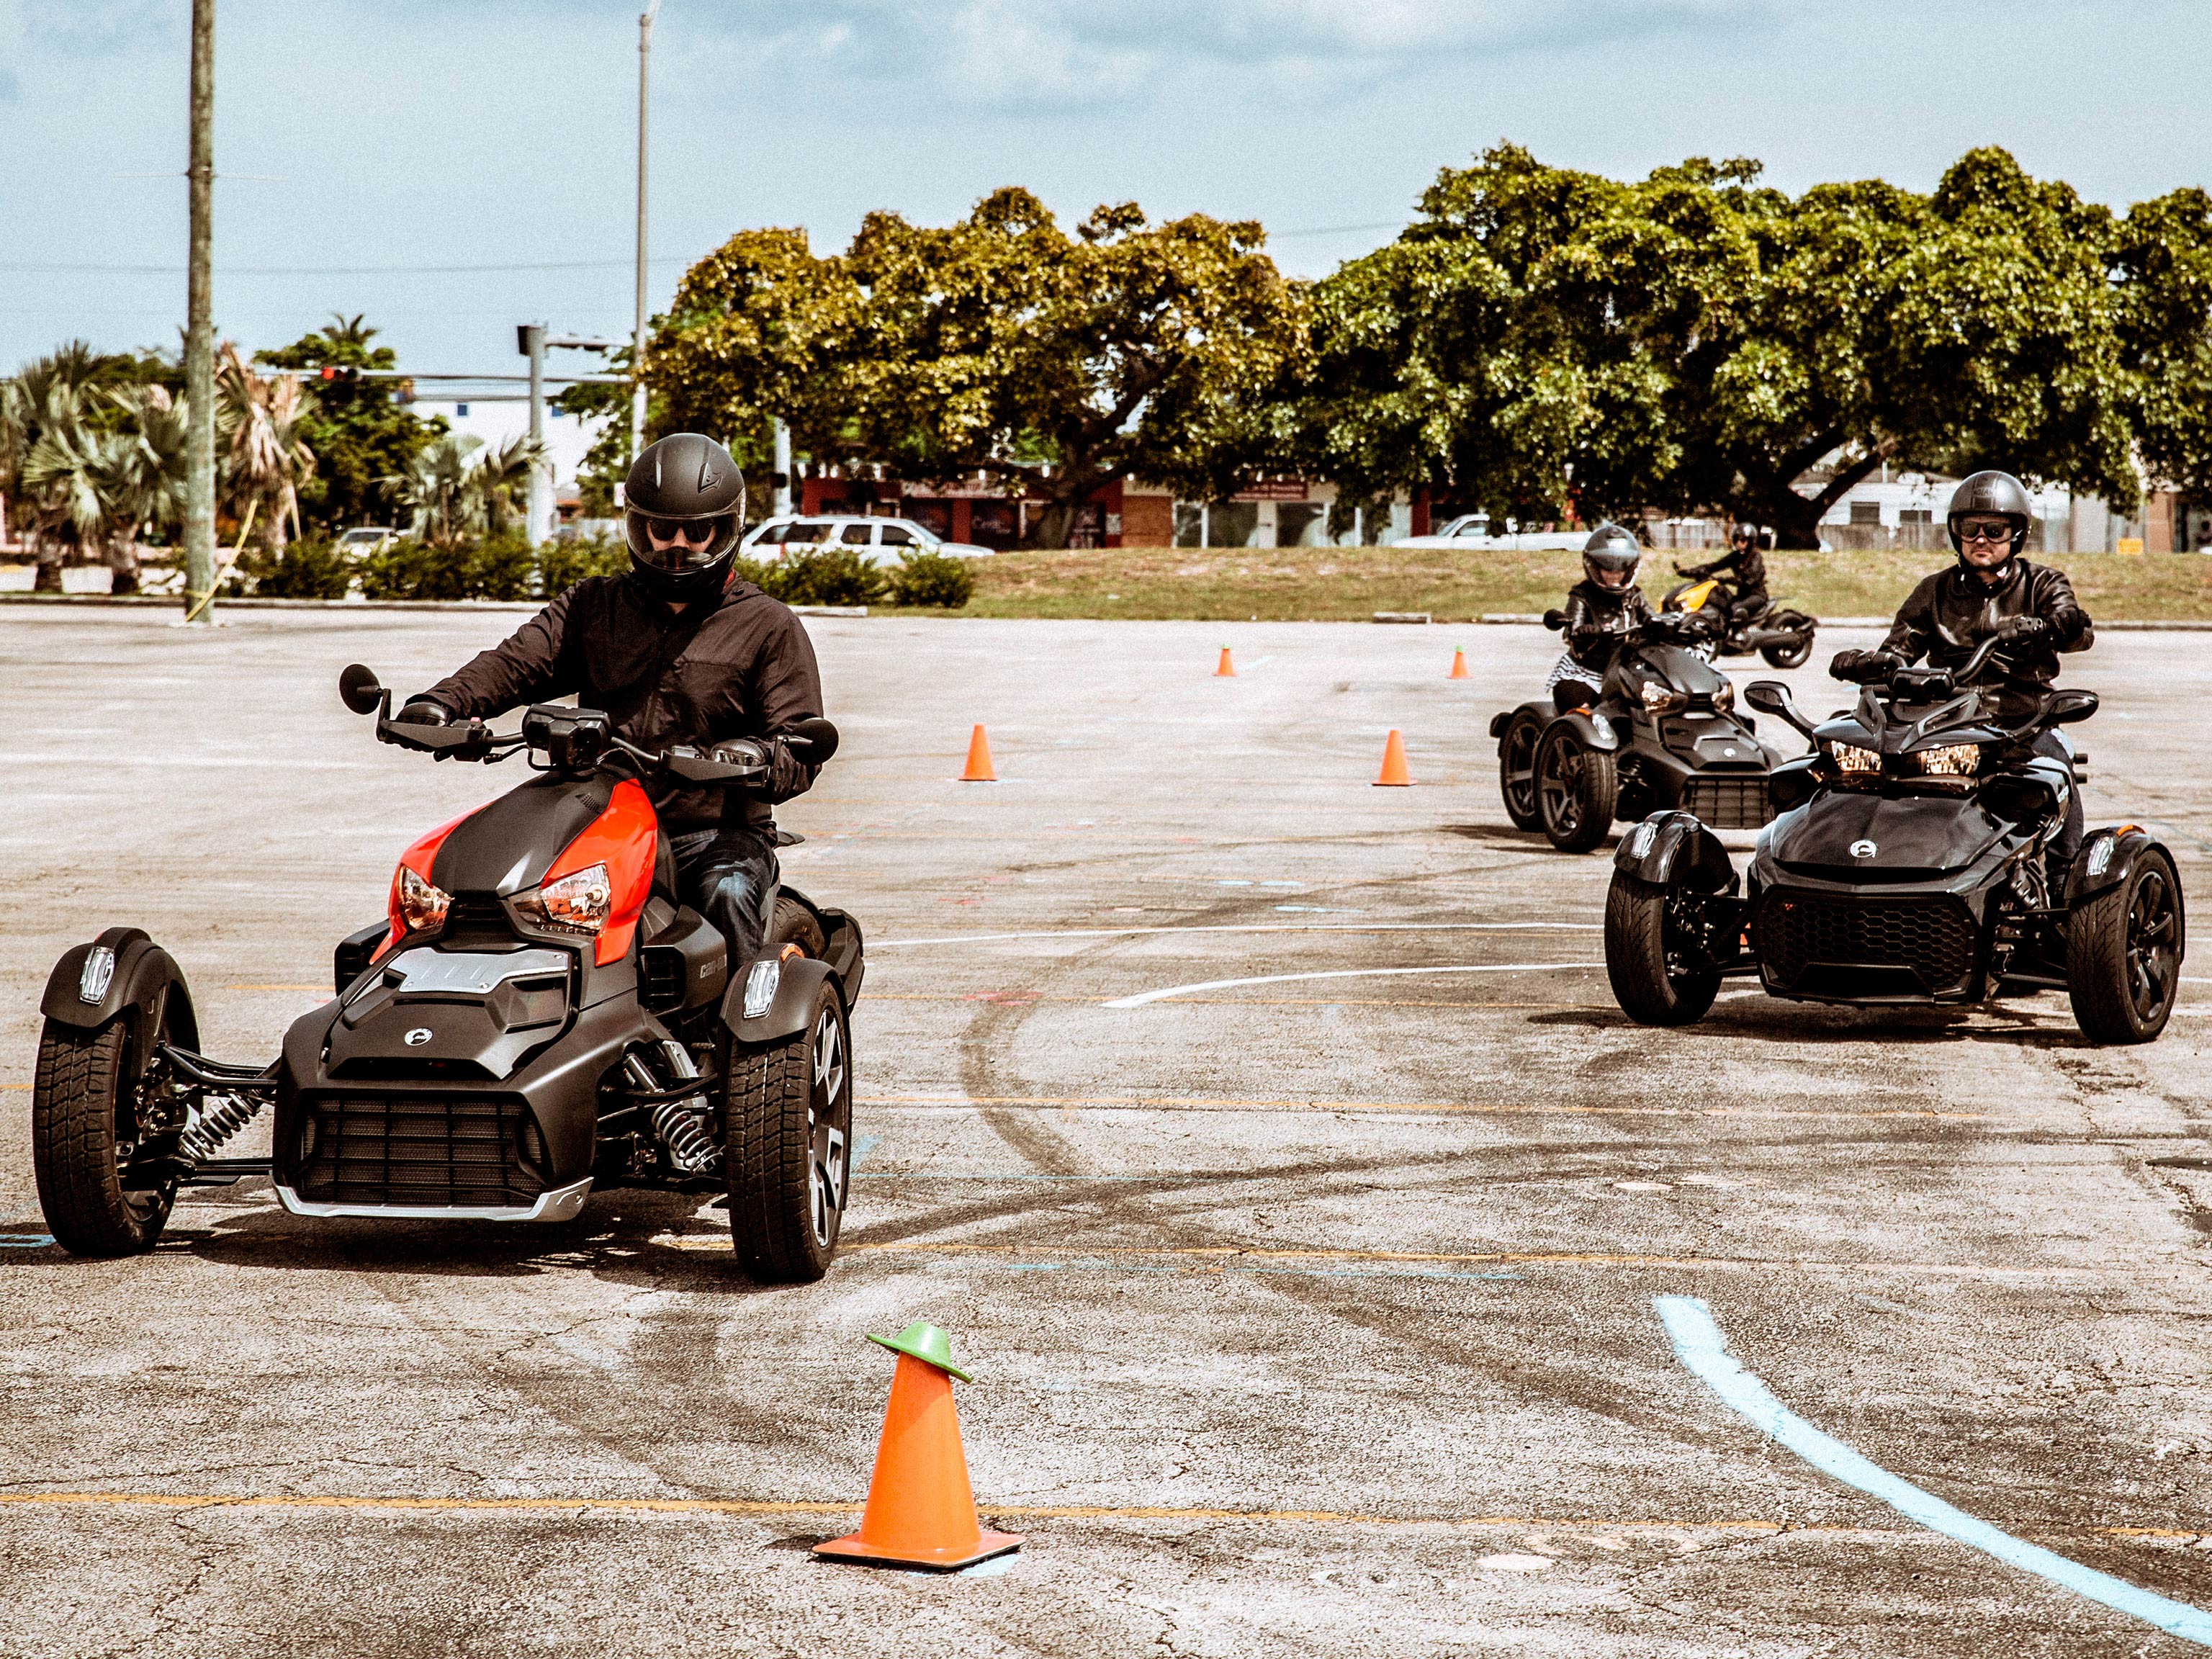 3-wheel Riders leaning the basics on a training course